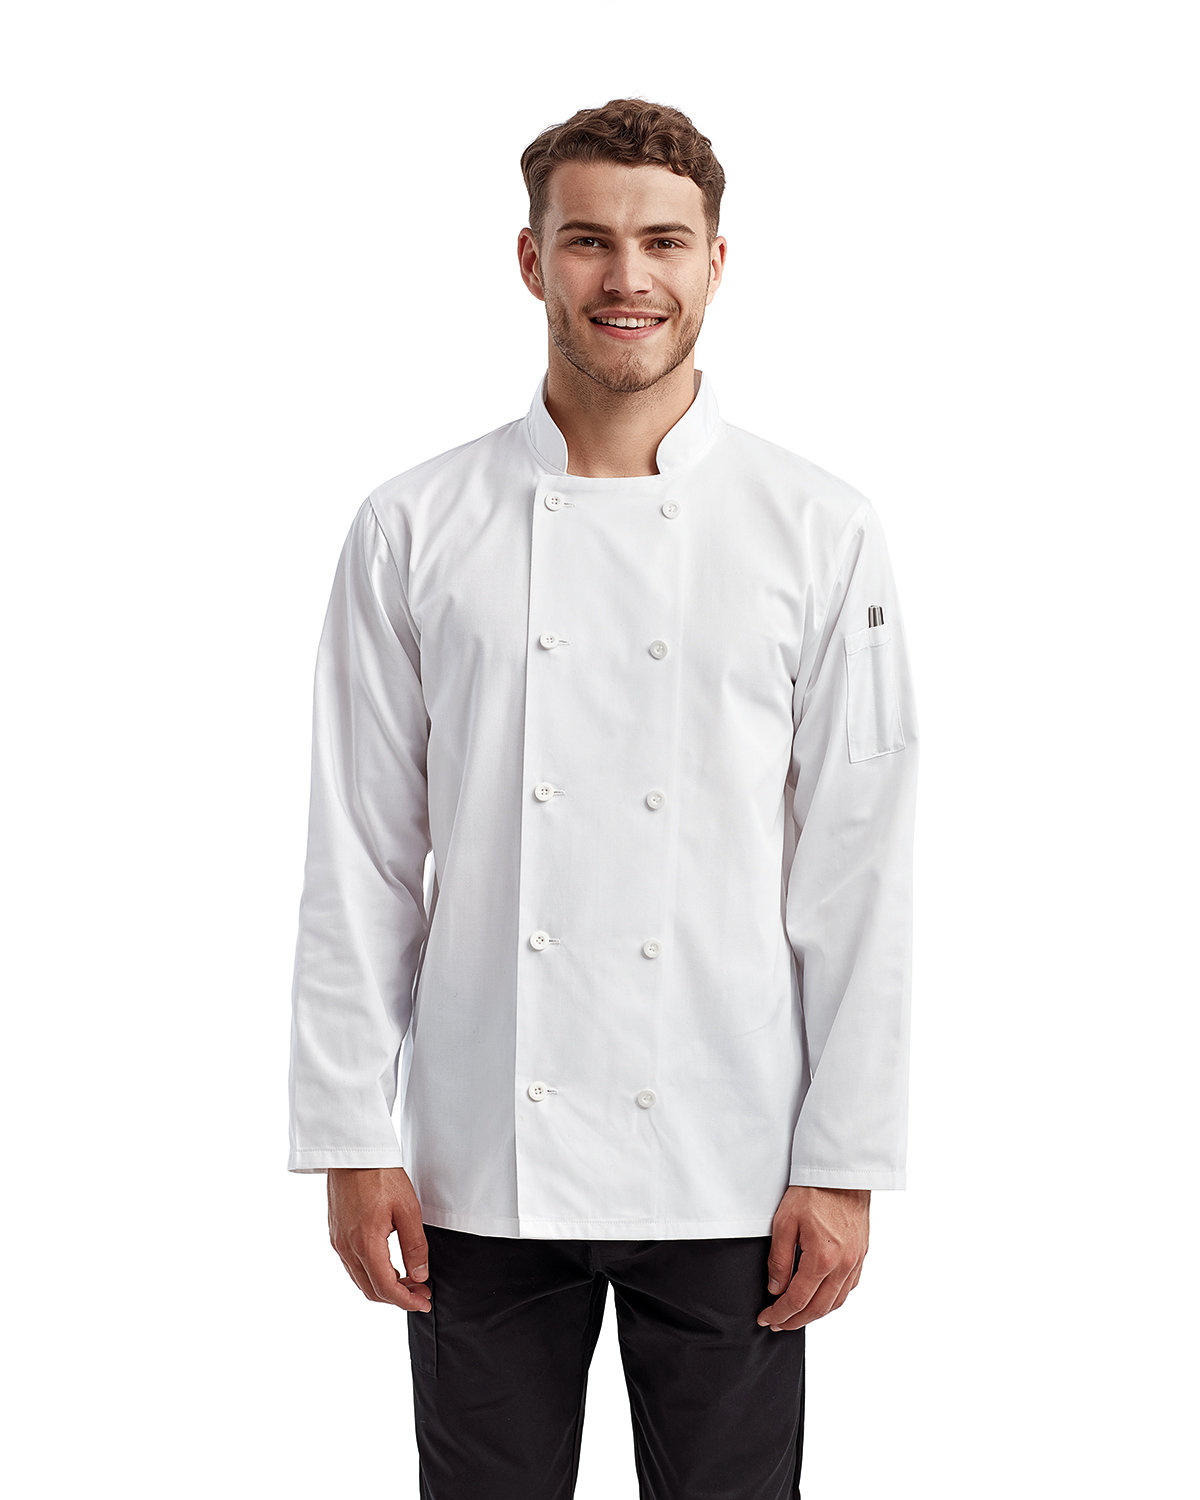 Artisan Collection by Reprime Unisex Long-Sleeve Sustainable Chef's Jacket WHITE 